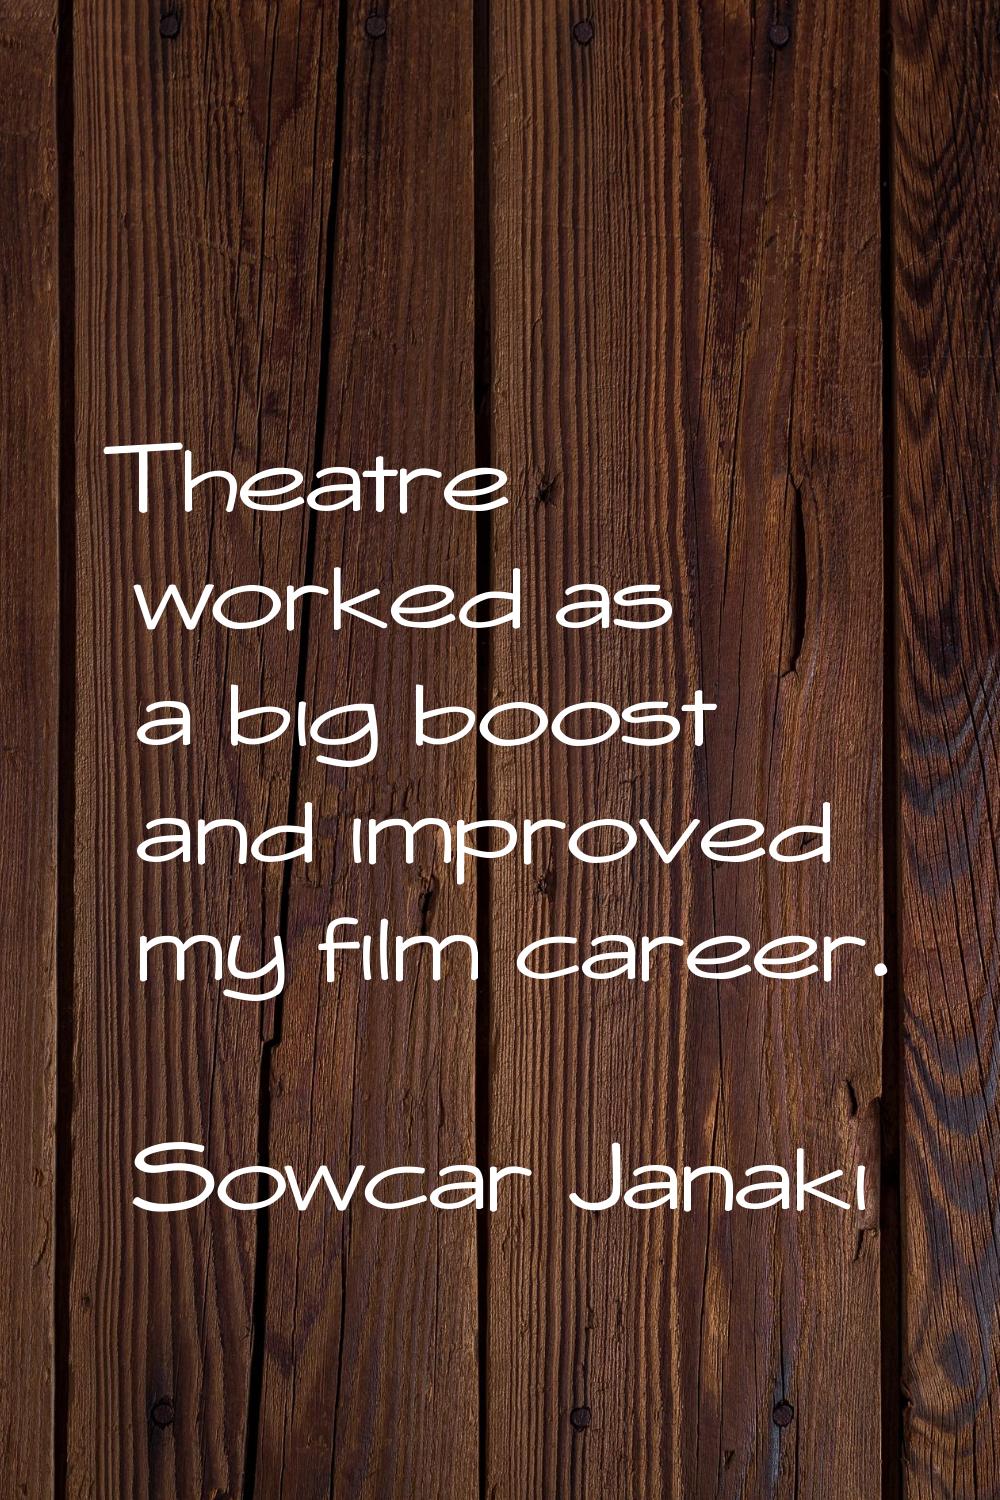 Theatre worked as a big boost and improved my film career.